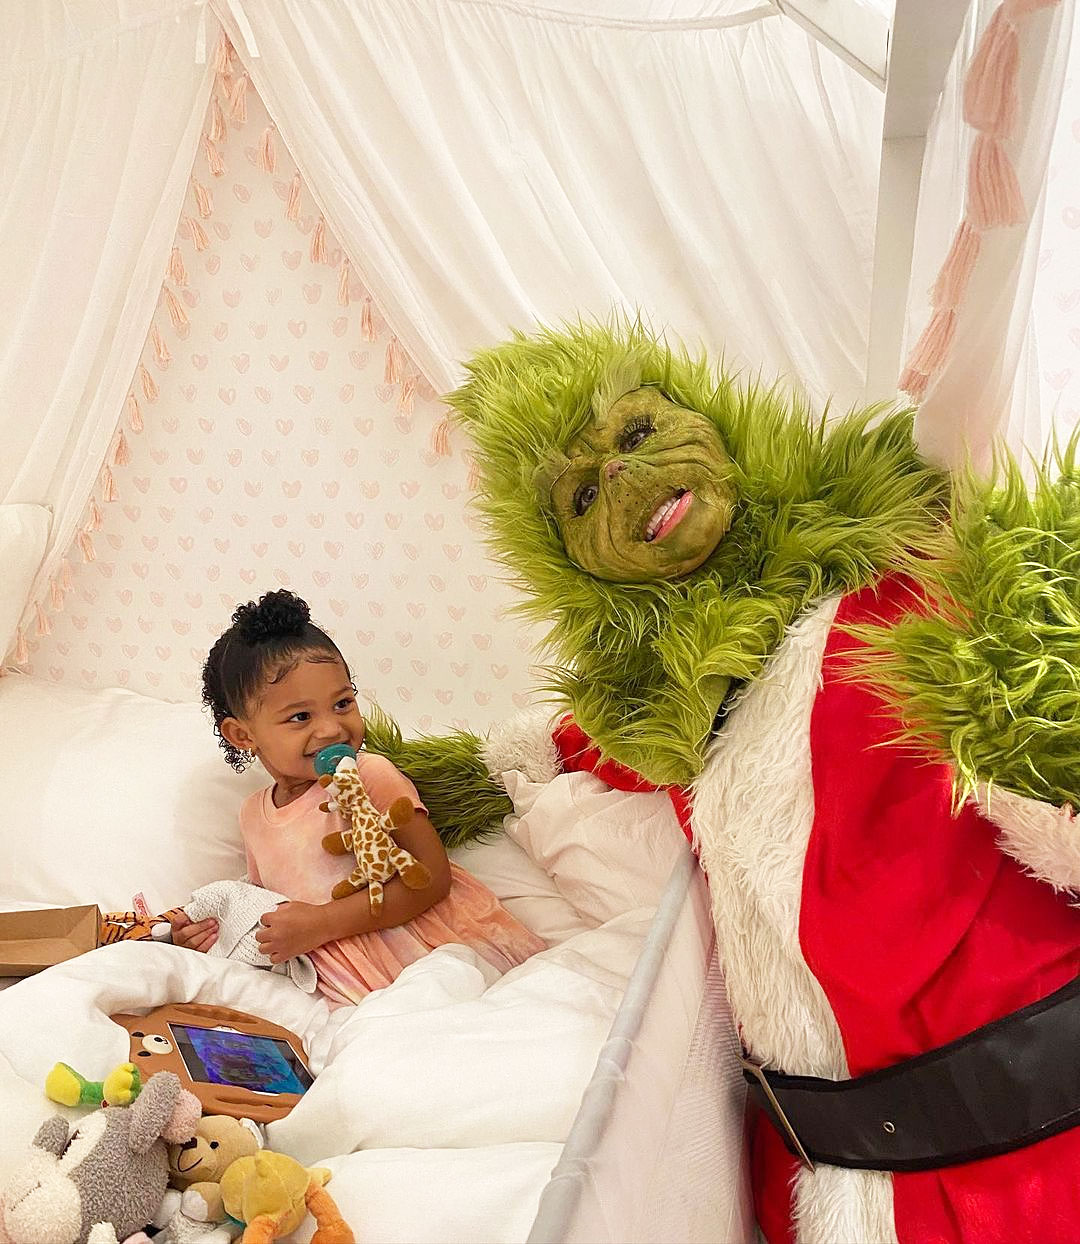 Kylie Jenner Daughter Stormi Is All Smiles Meeting the Grinch